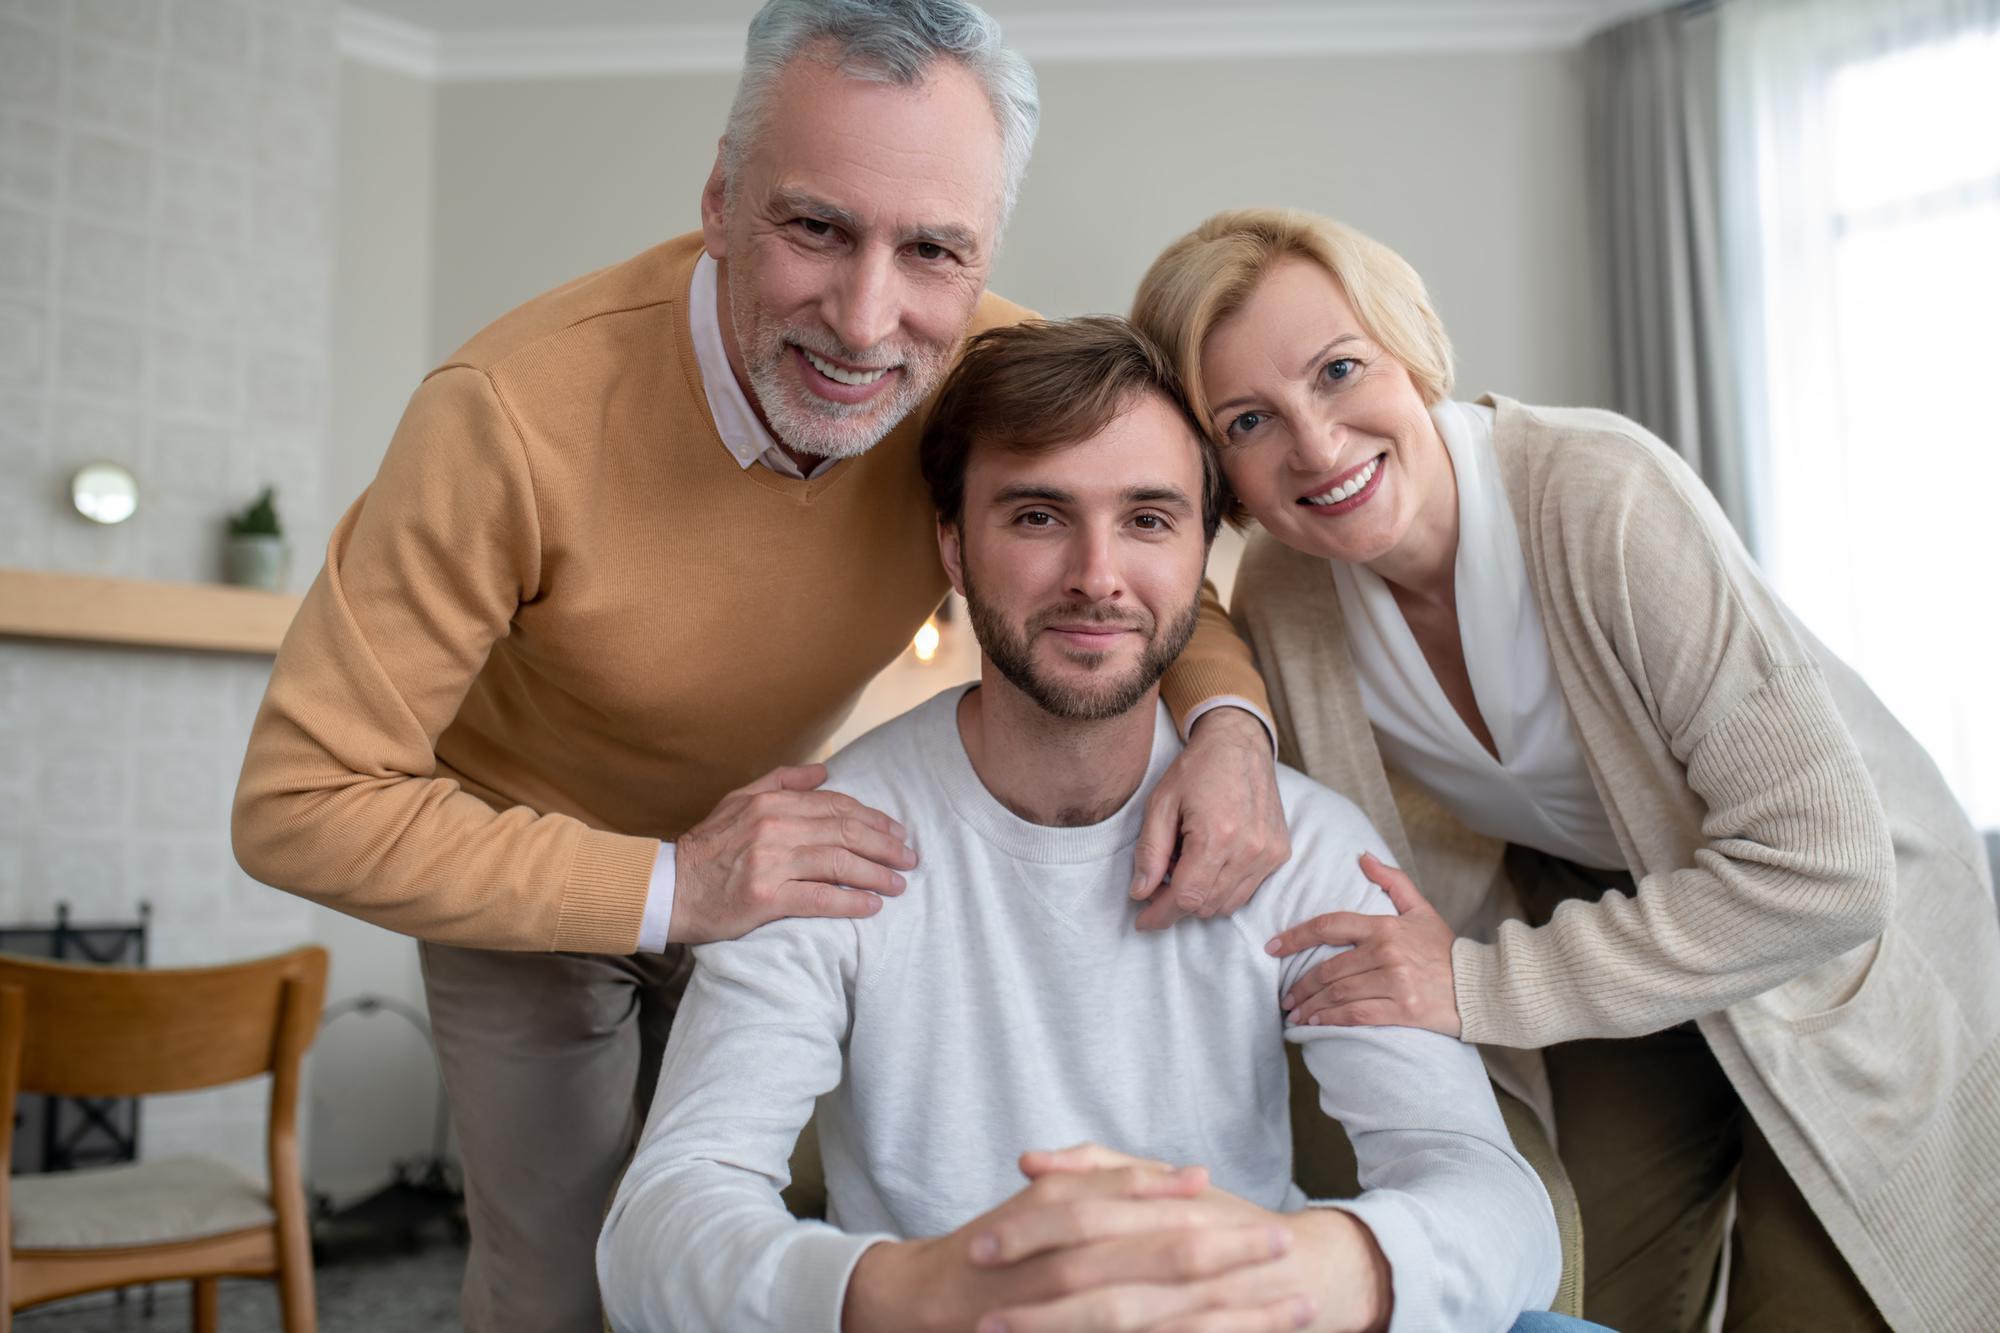 A young man sandwiched in an embrace by his proud parents | Source: Freepik